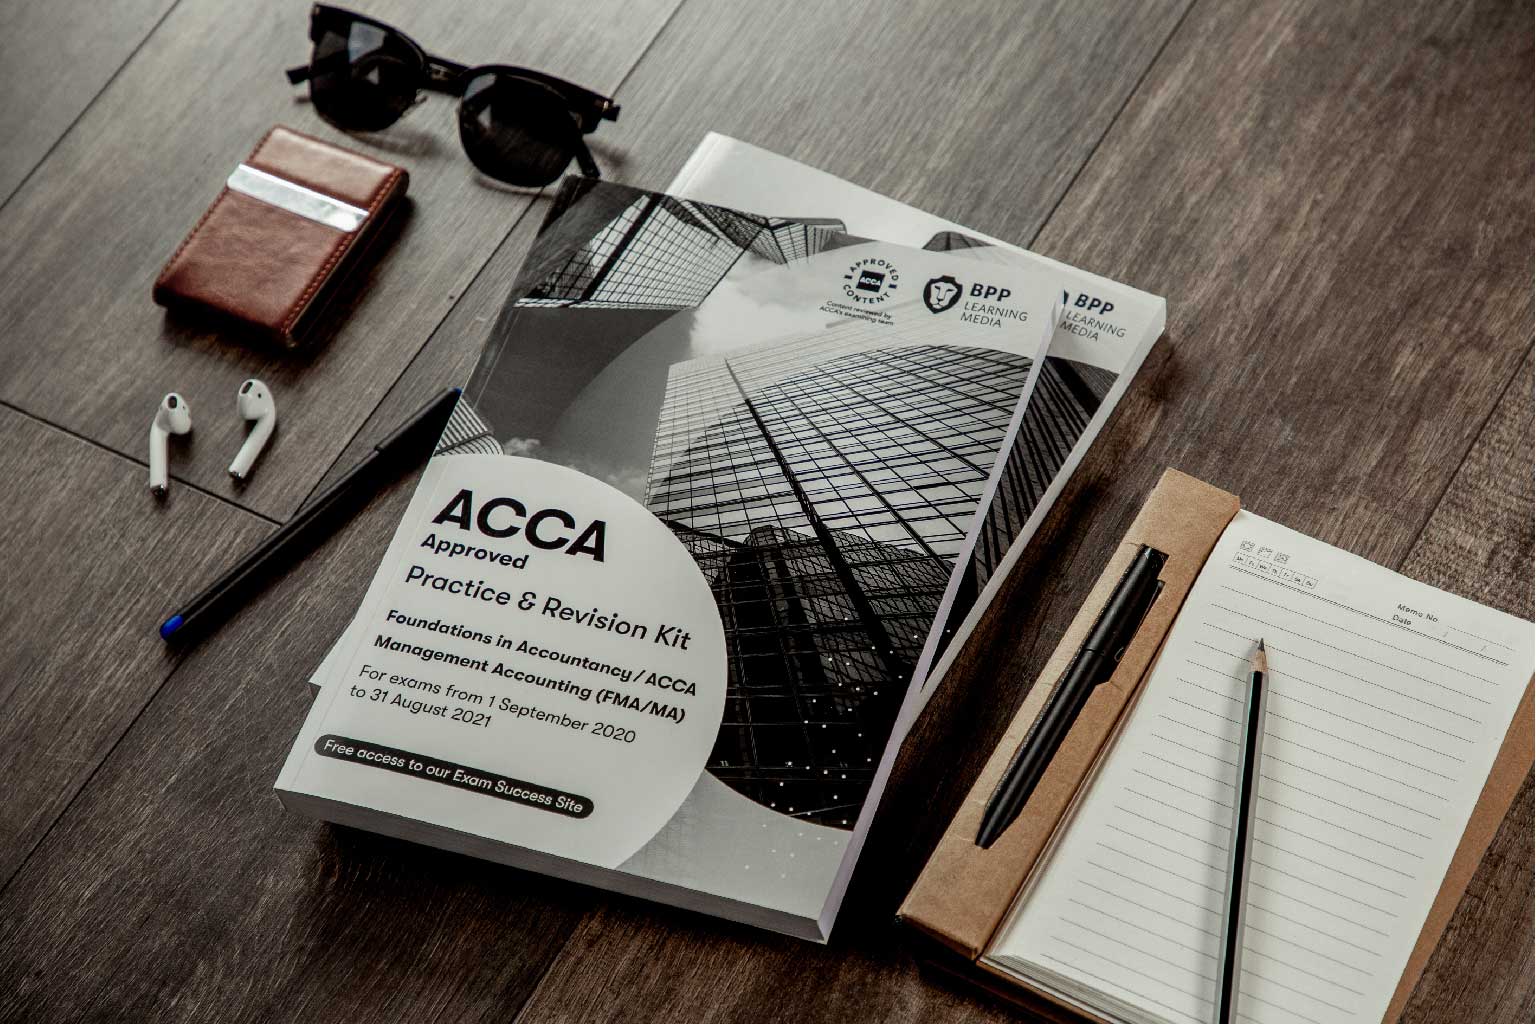 acca, cima, study text. practice and revision kit, course book, bpp, work book, online bookstore